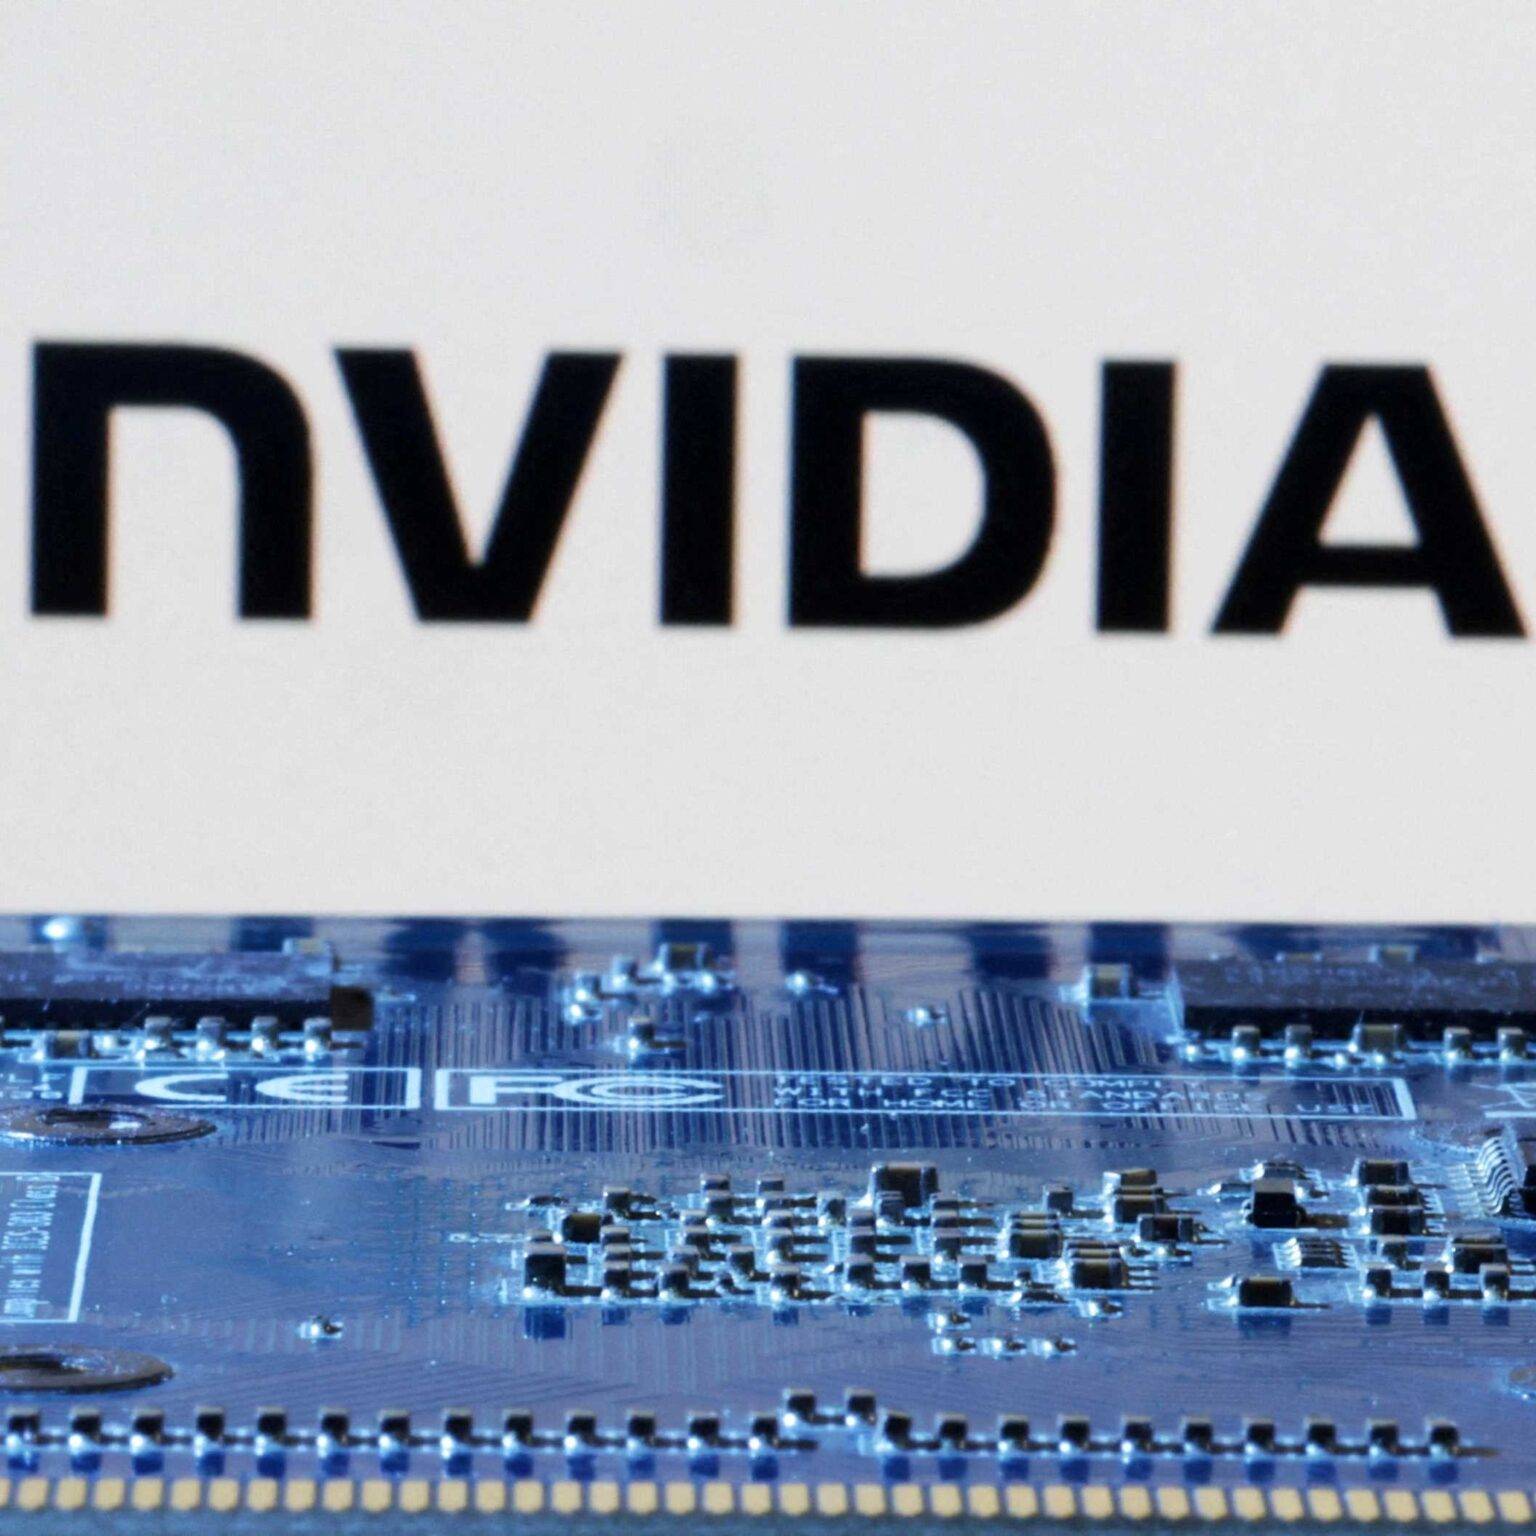 China’s military and government acquire Nvidia chips despite US ban